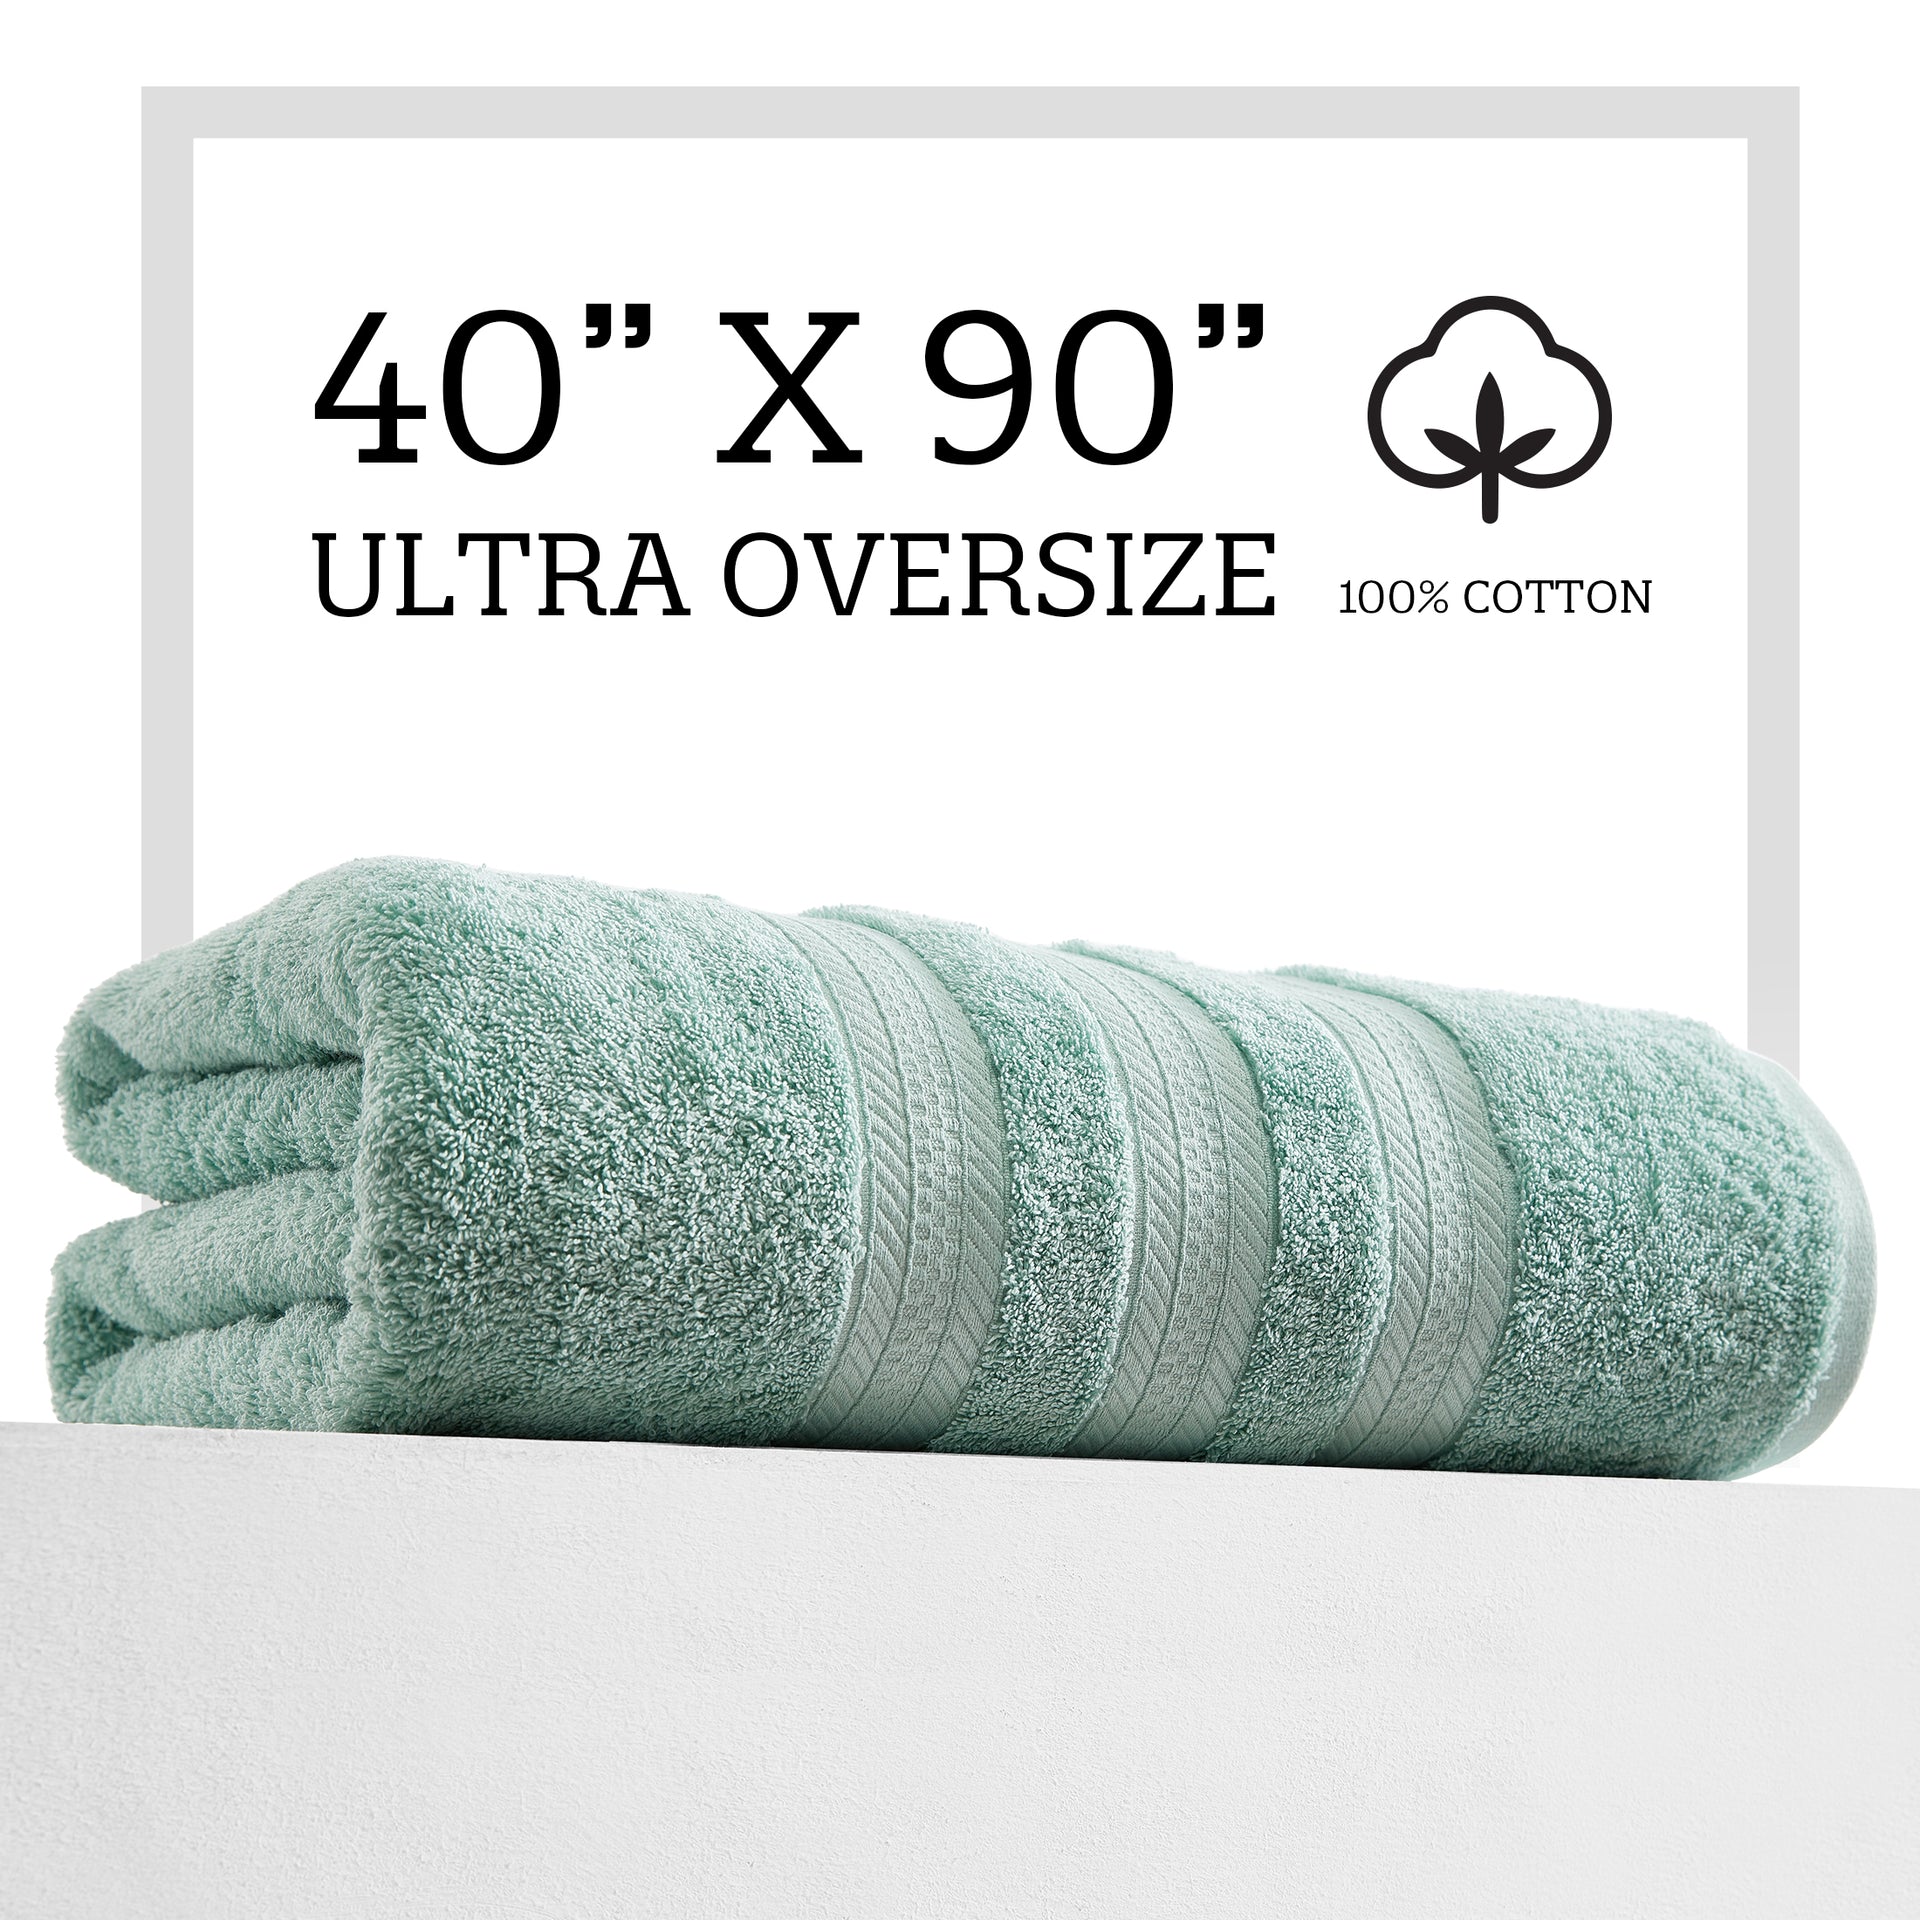 Set of 4 Luxury XL Bath Towels by Bumble - Oversized Bath Towels Extra  Large, Hotel Quality Towels, 650 GSM Soft Combed Cotton, Home Spa Bathroom